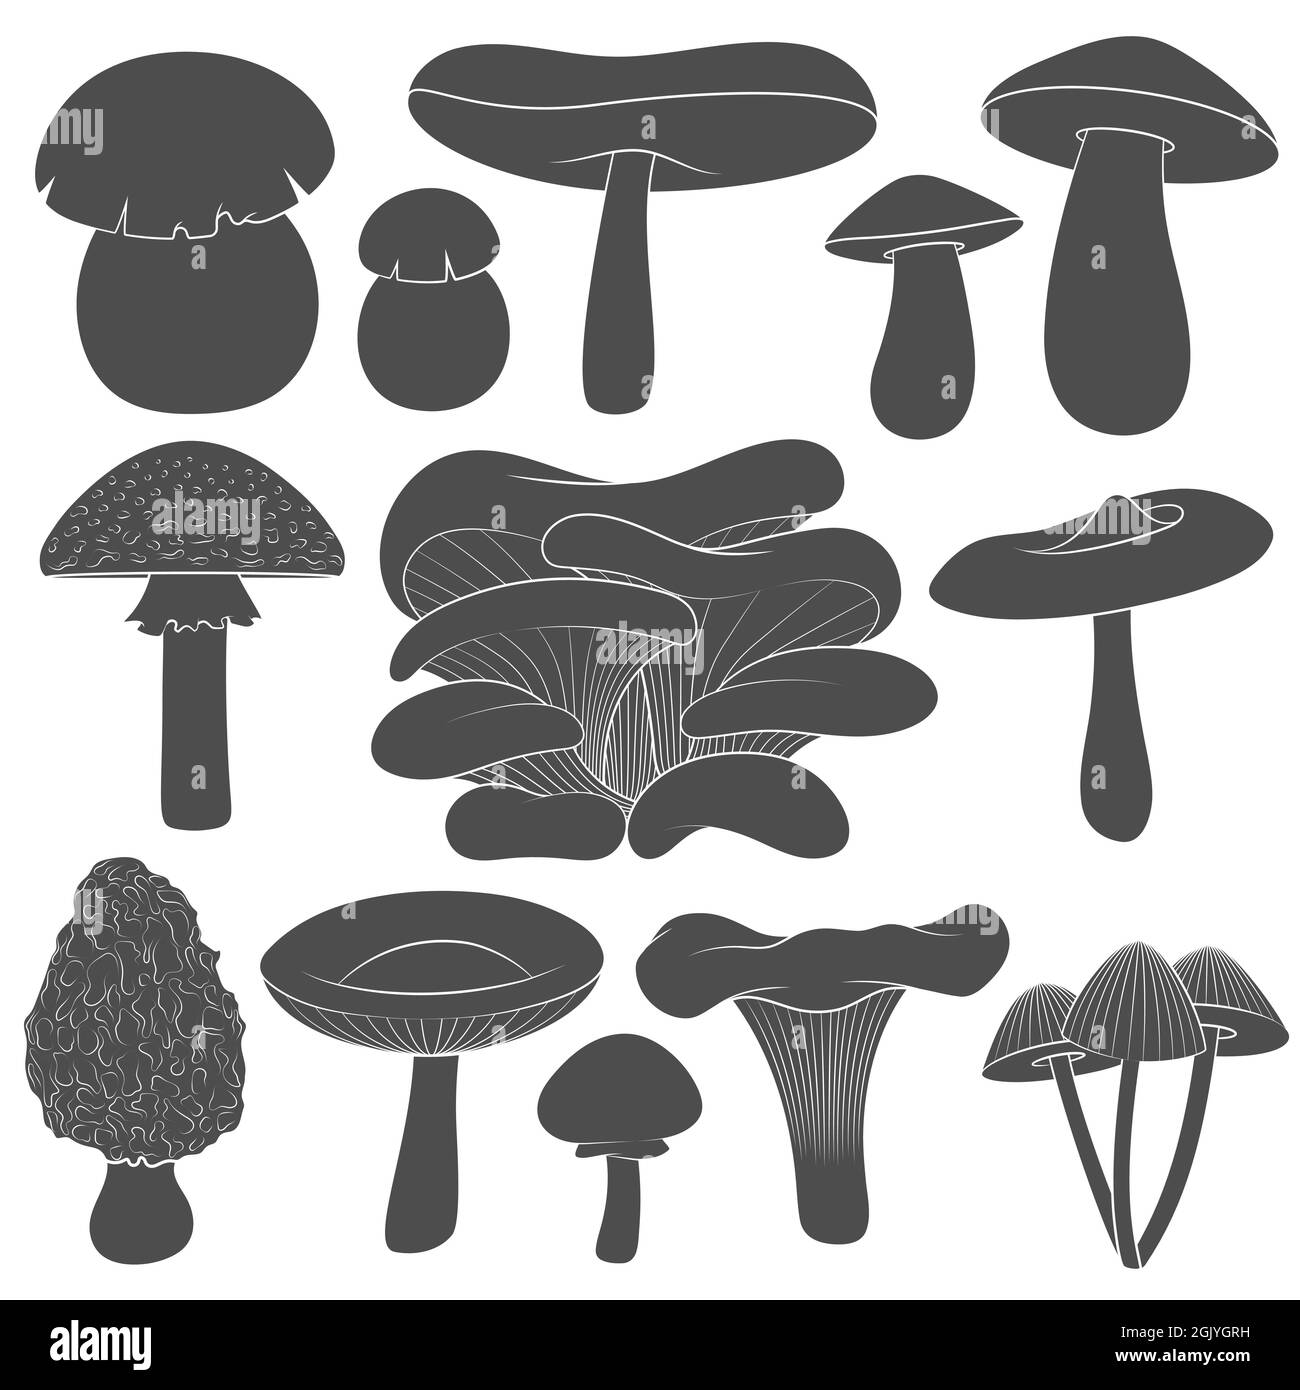 Set of black and white images with mushrooms. Isolated vector objects on white background. Stock Vector